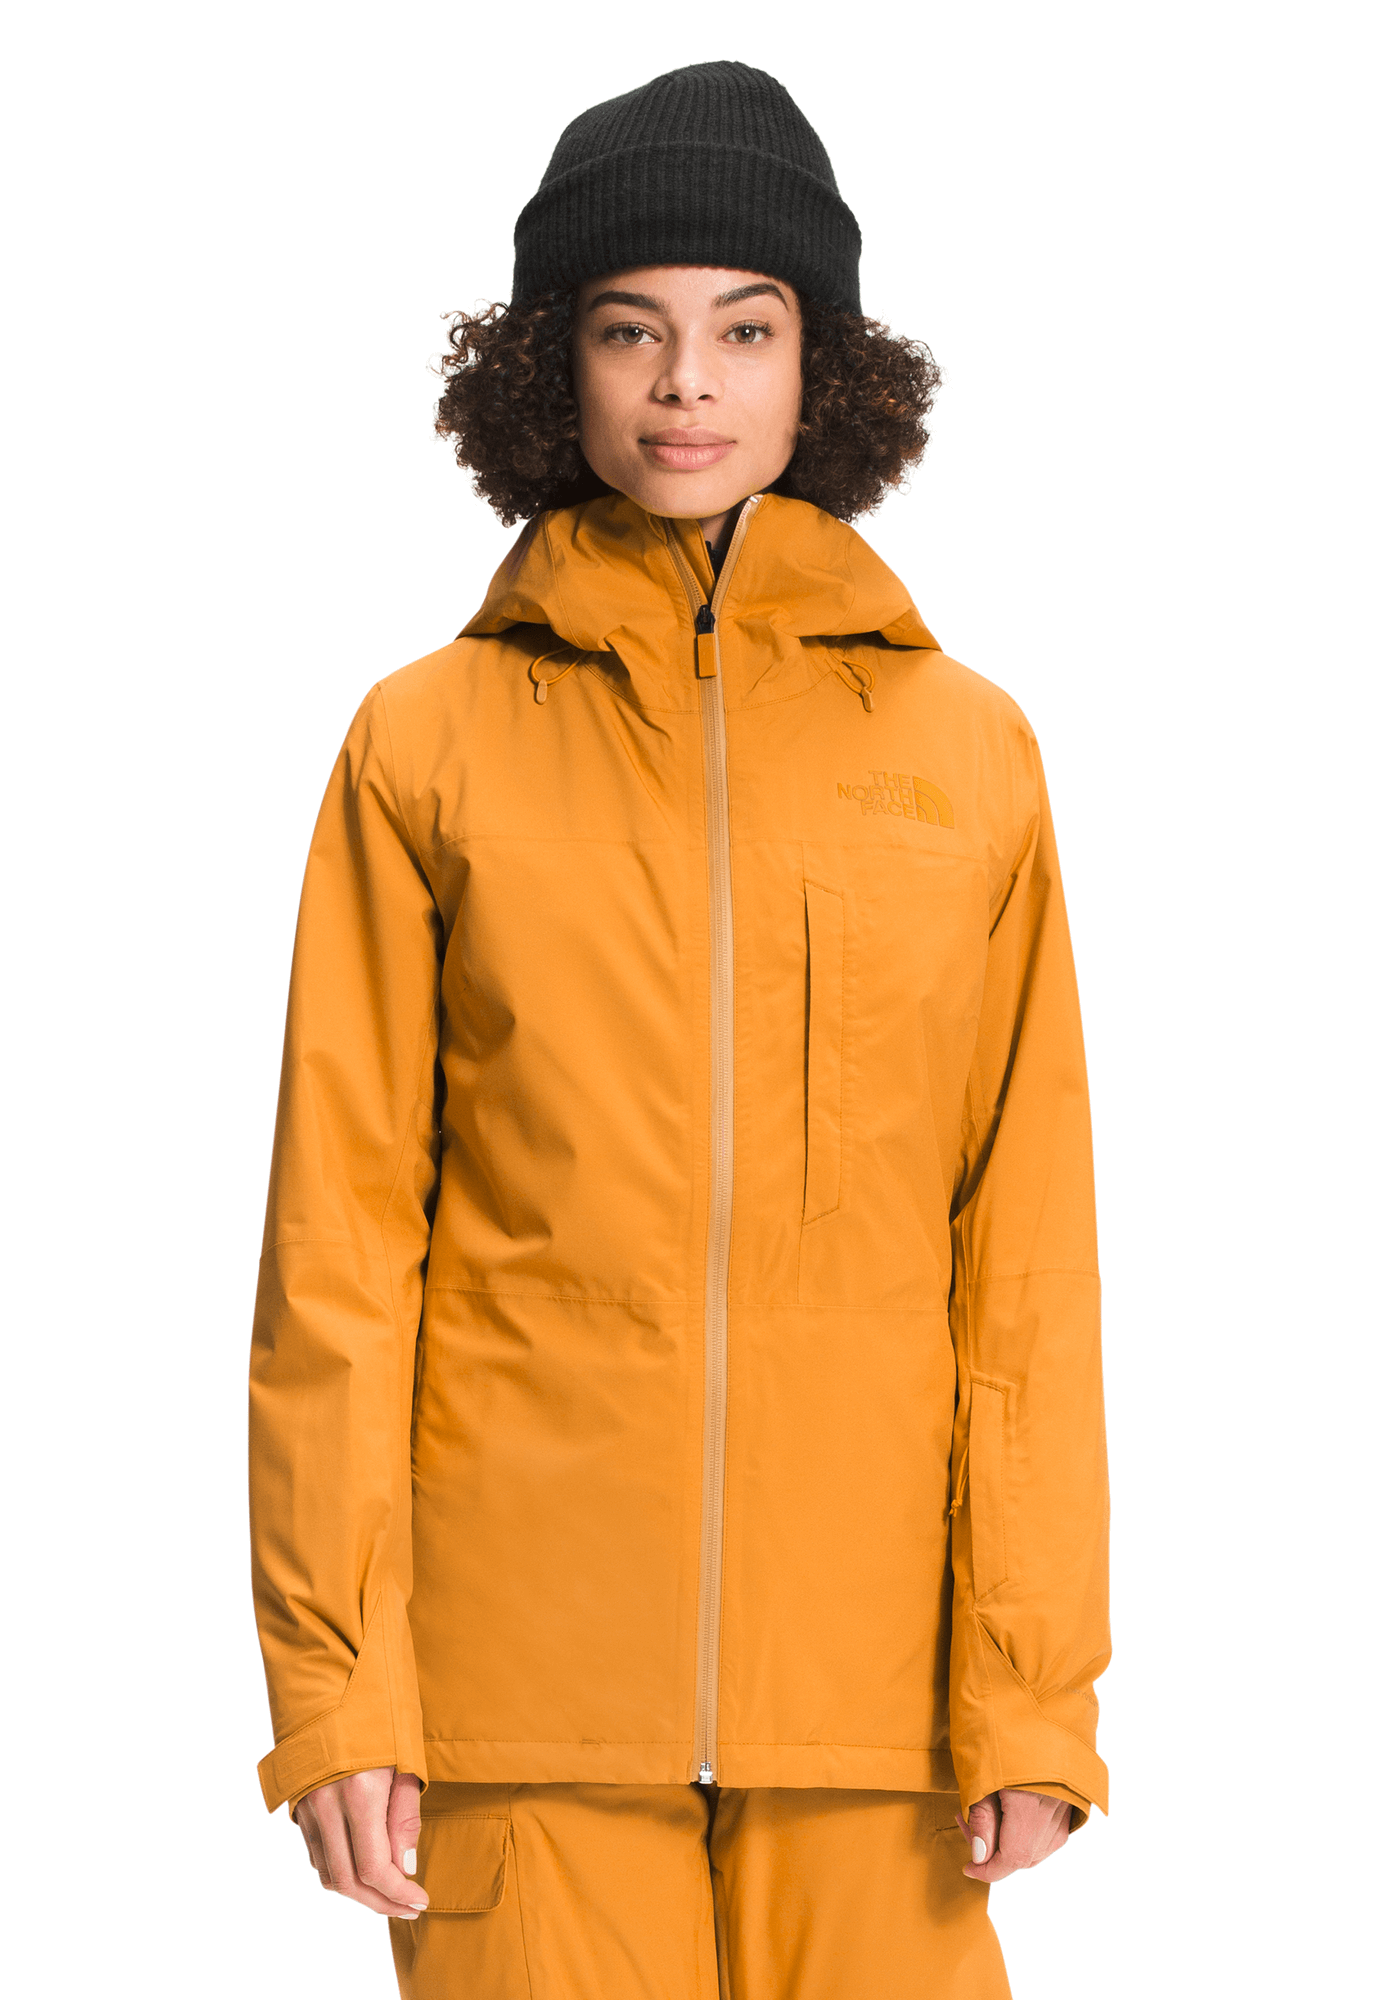 Women's Thermoball Jackets